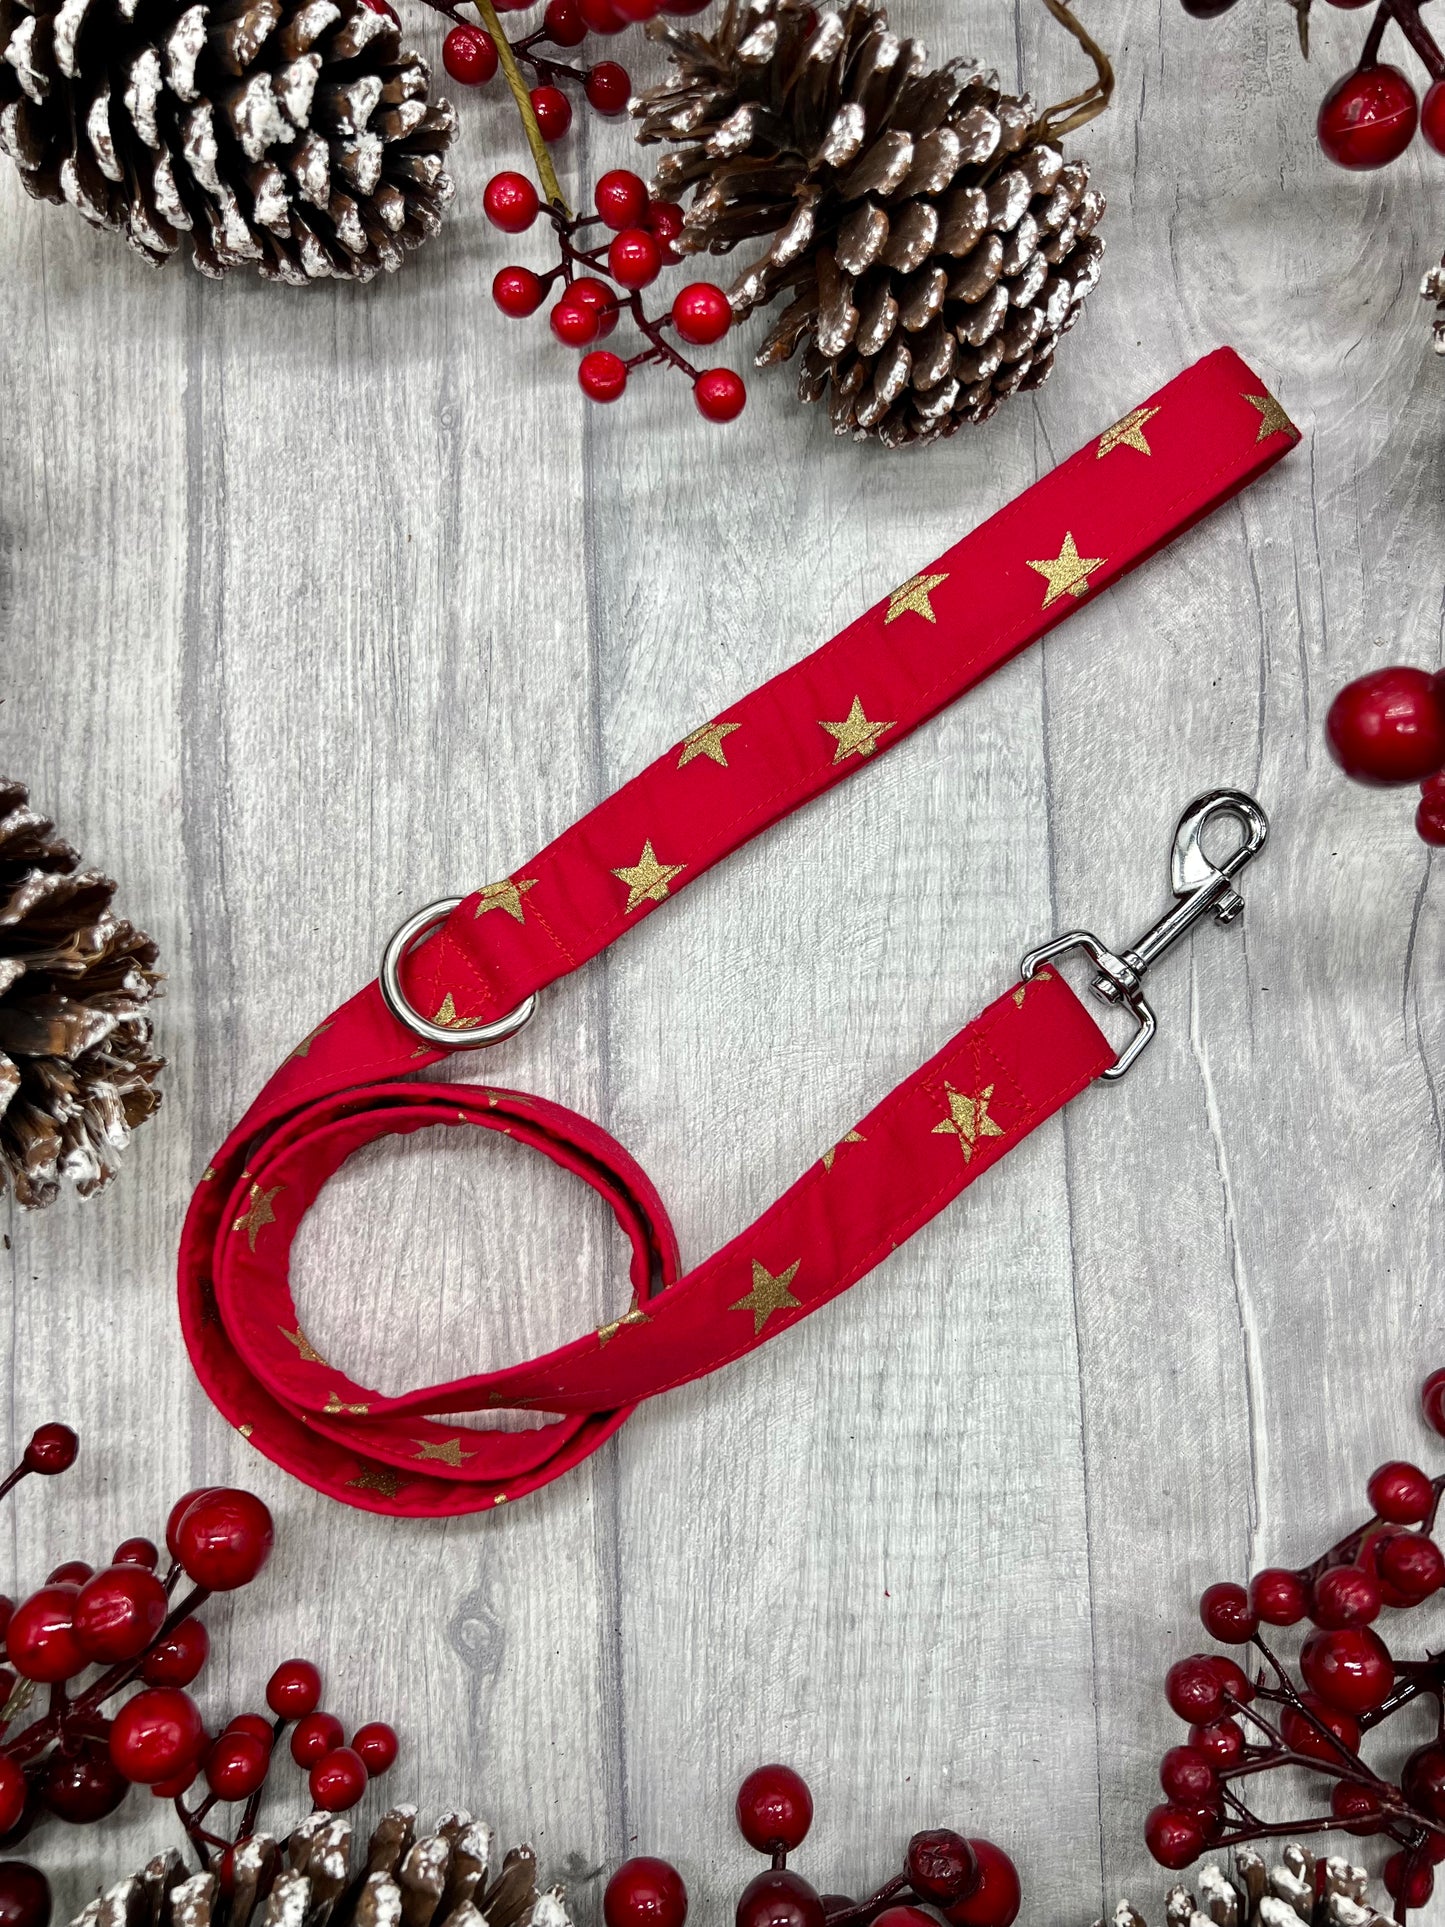 Christmas gold star on red dog lead